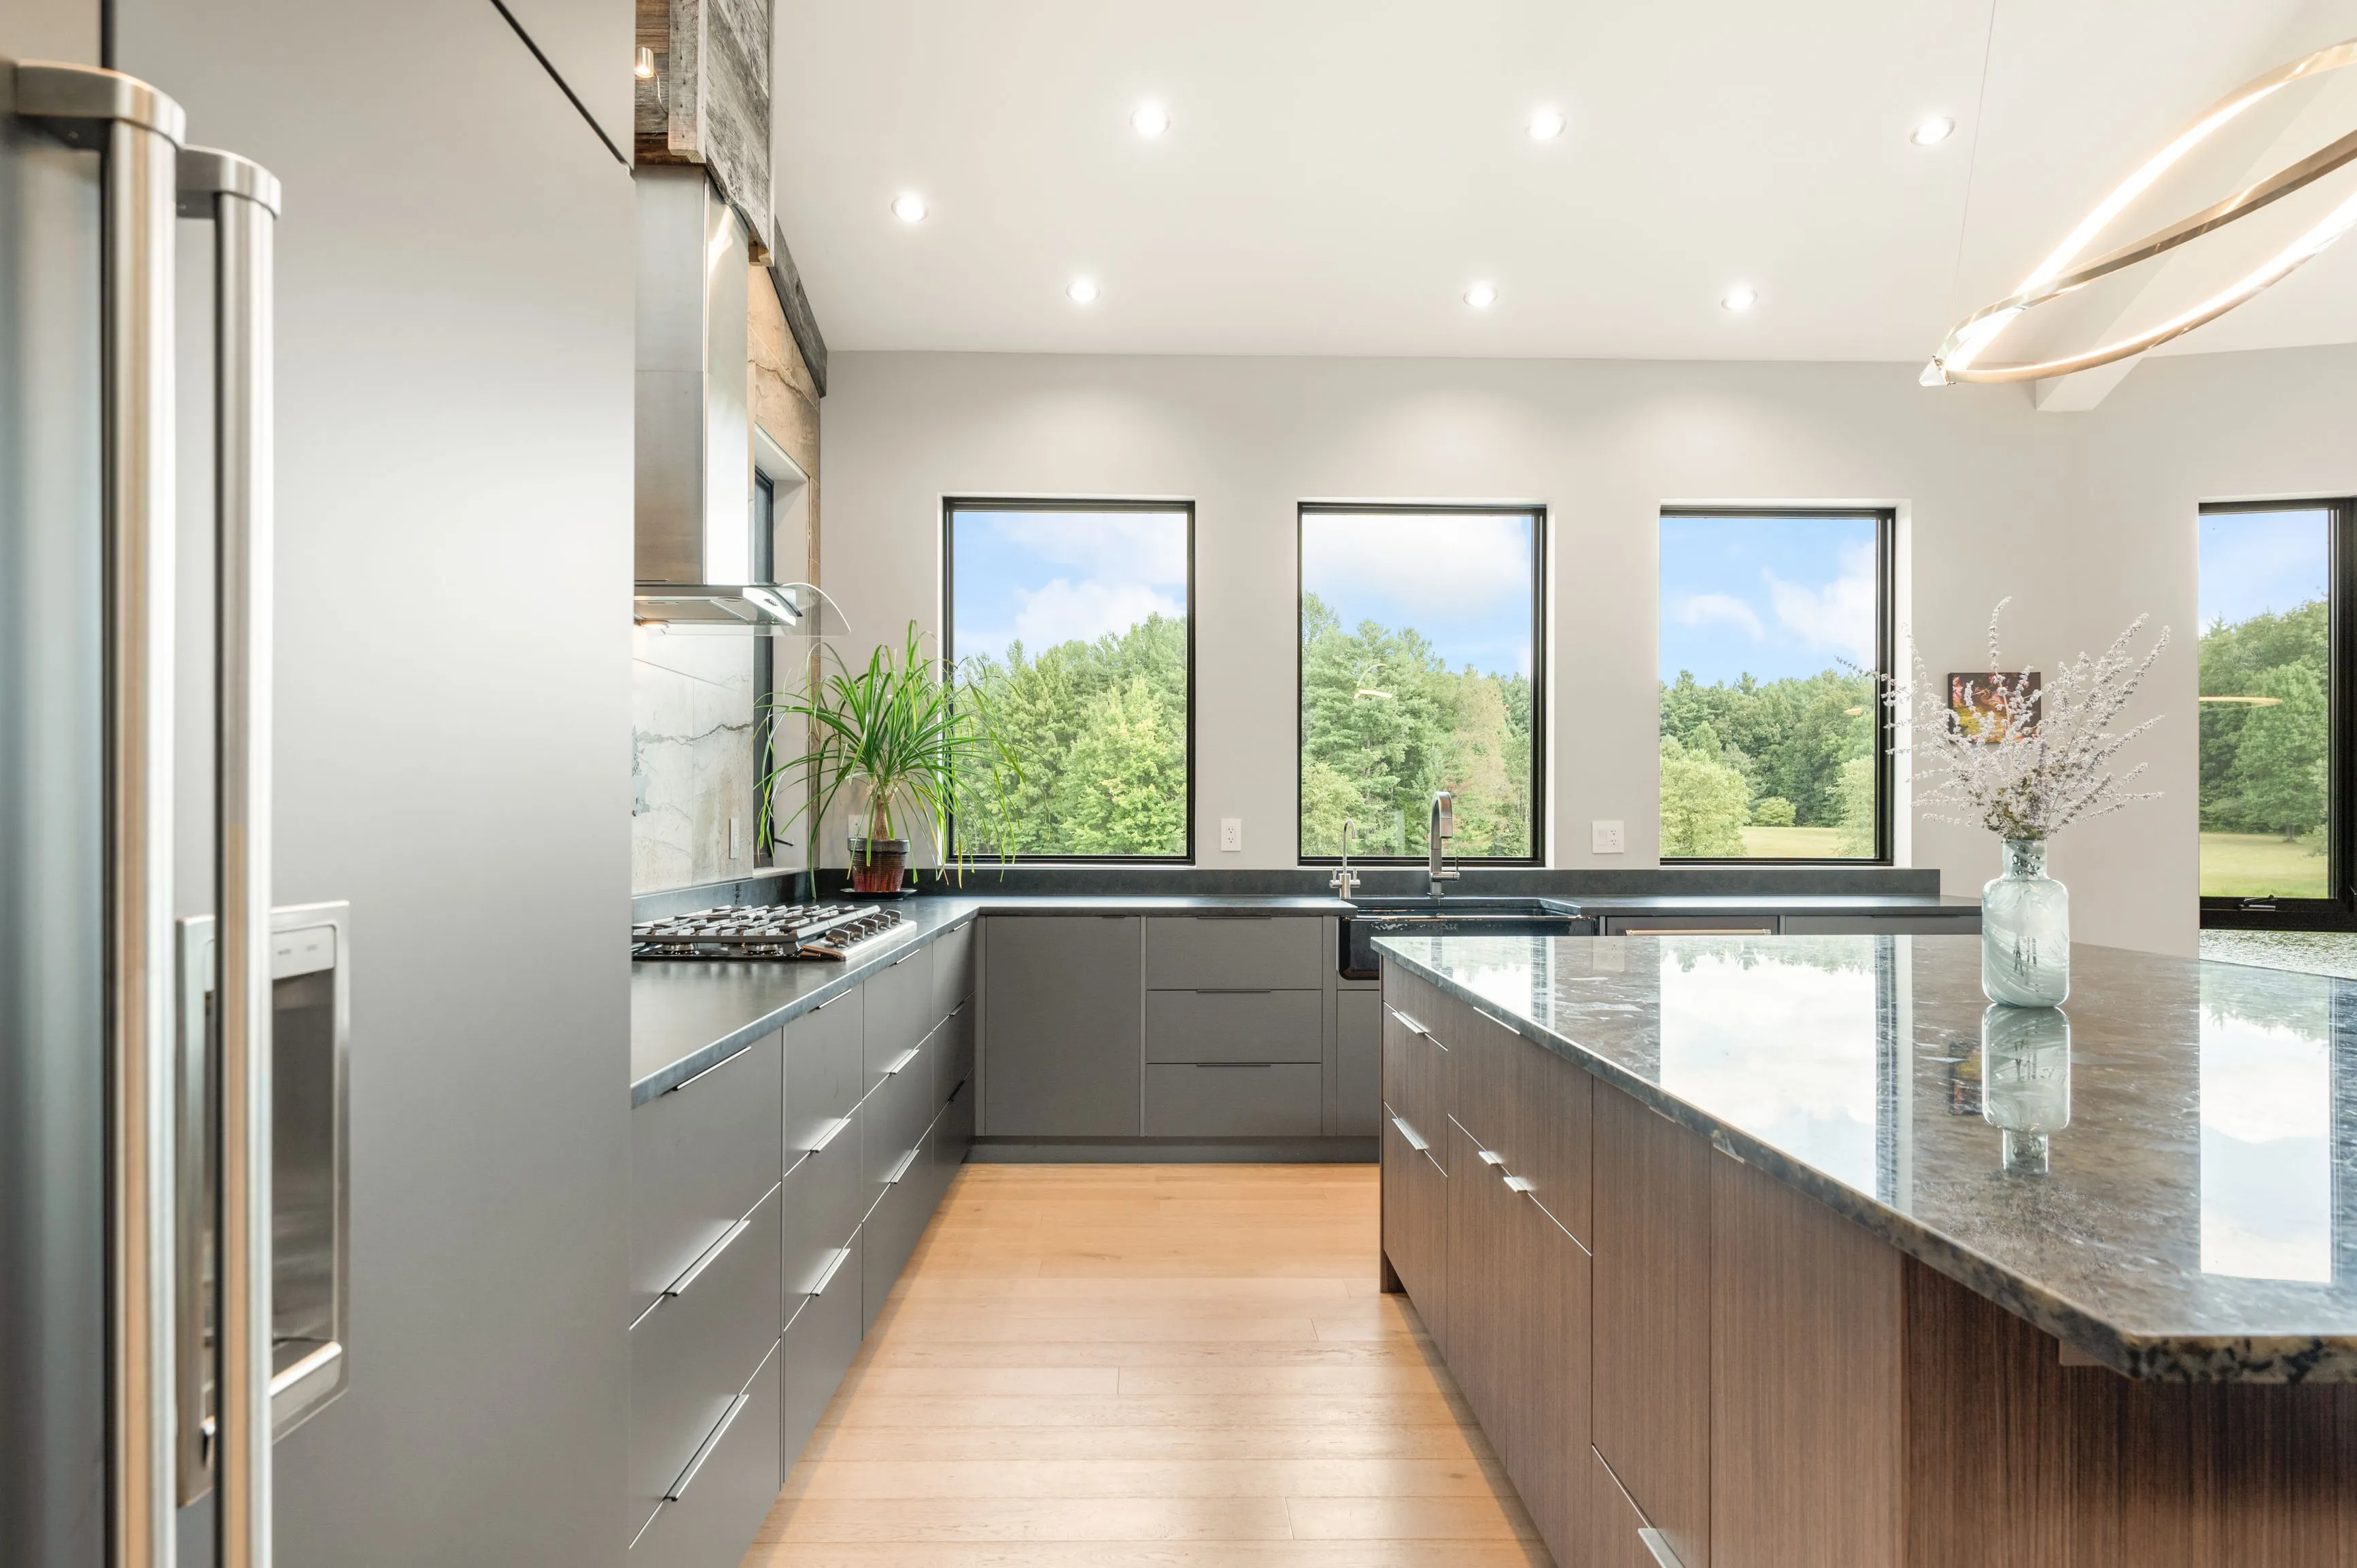 Modern kitchen interior with stainless steel appliances, dark cabinetry, granite countertops, and a view of greenery through the windows.